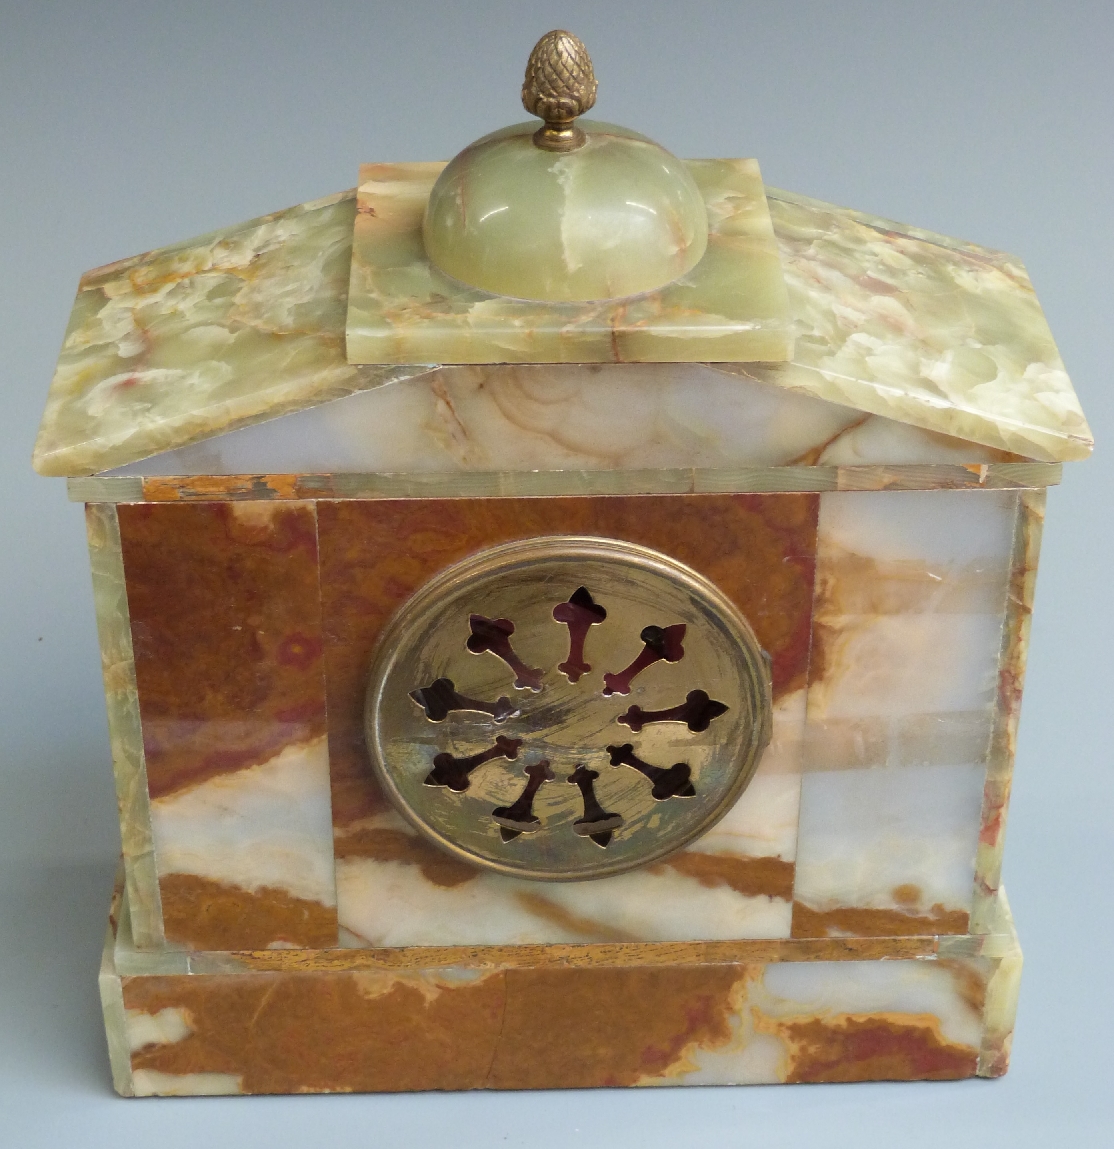 Late 19th/ early 20thC French architectural green onyx mantel clock, the numbered movement by Japy - Image 5 of 5